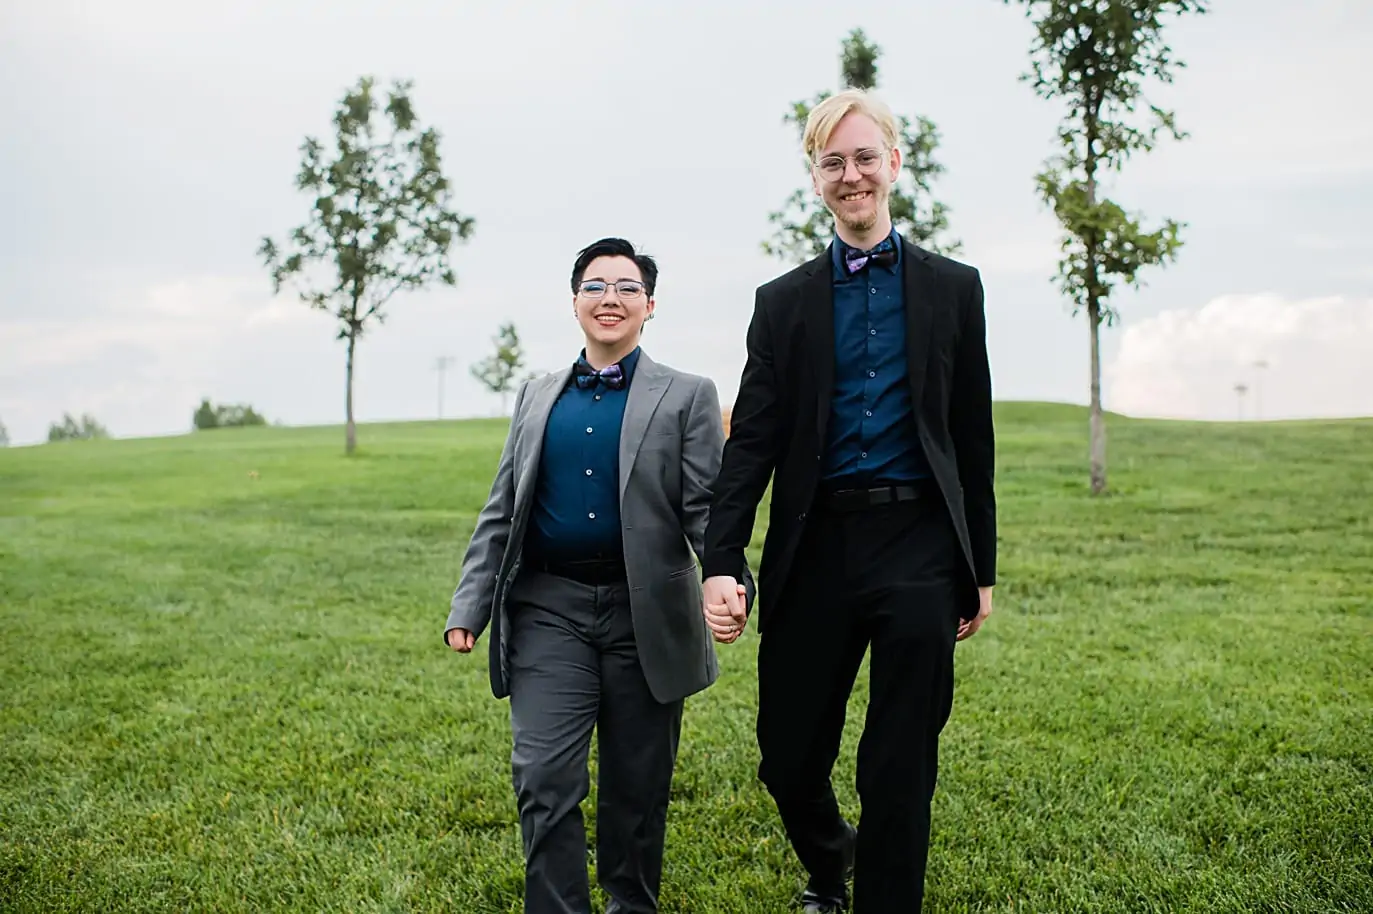 Queer couple walk hand in hand in suits at LGBTQ wedding in Fort Collins